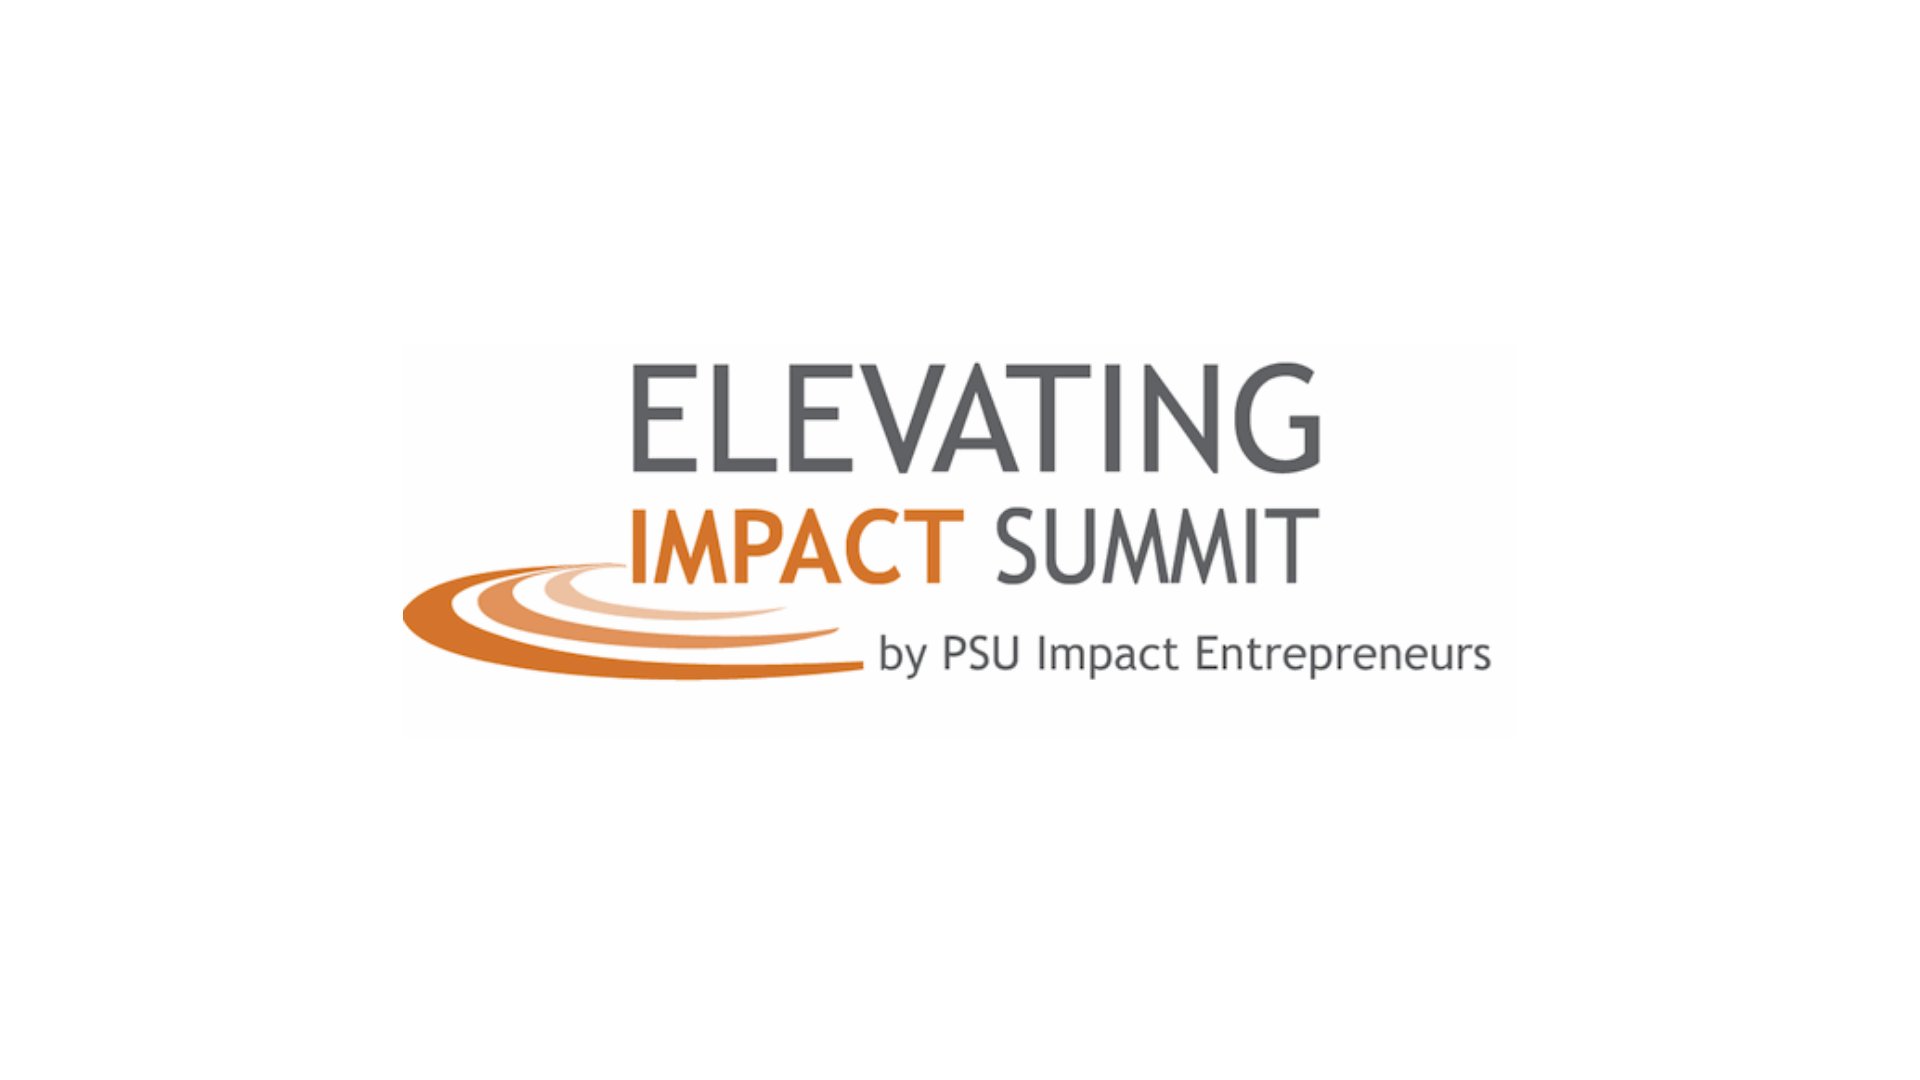 Updated 2013 Elevating Impact graphic.